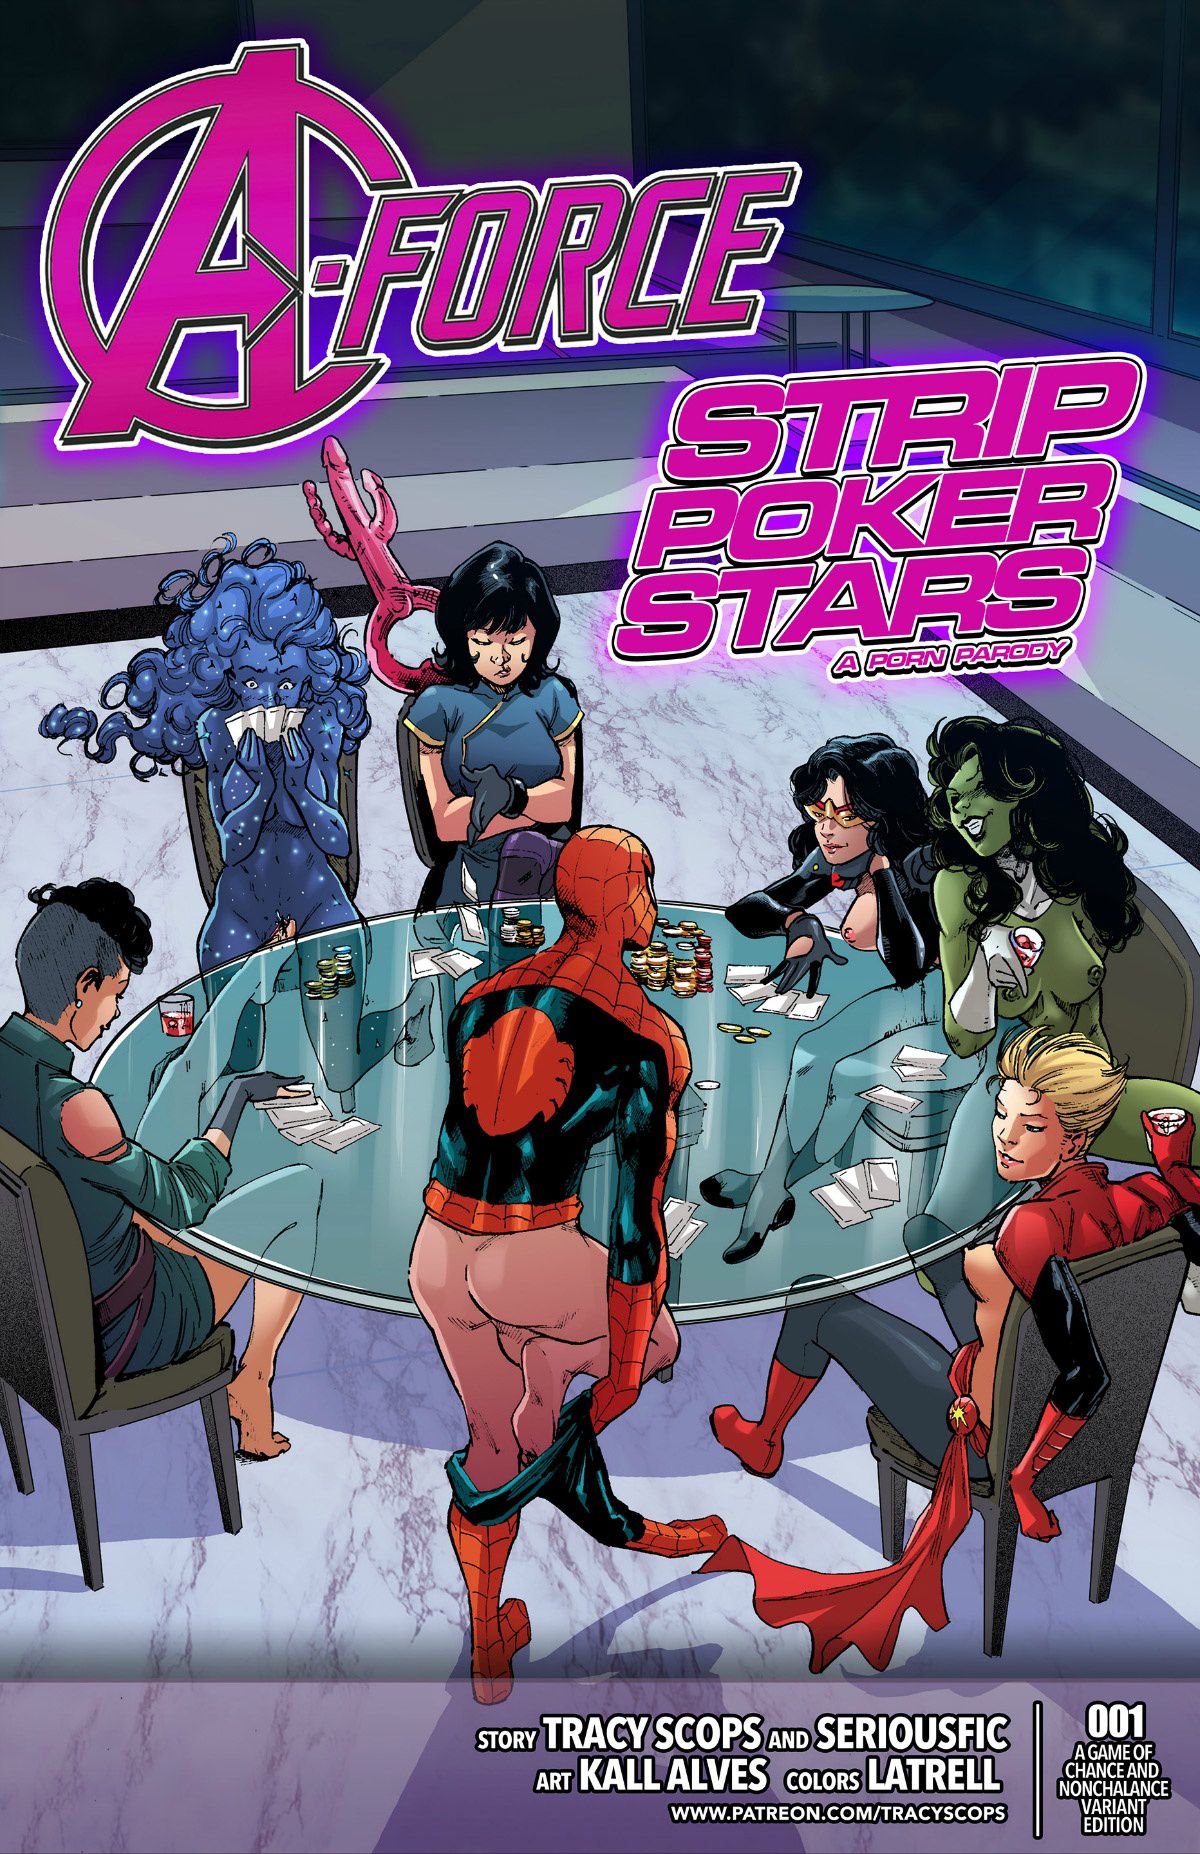 A-Force Strip Poker Stars (Spider-Man , The Avengers) Tracy Scops - 1 